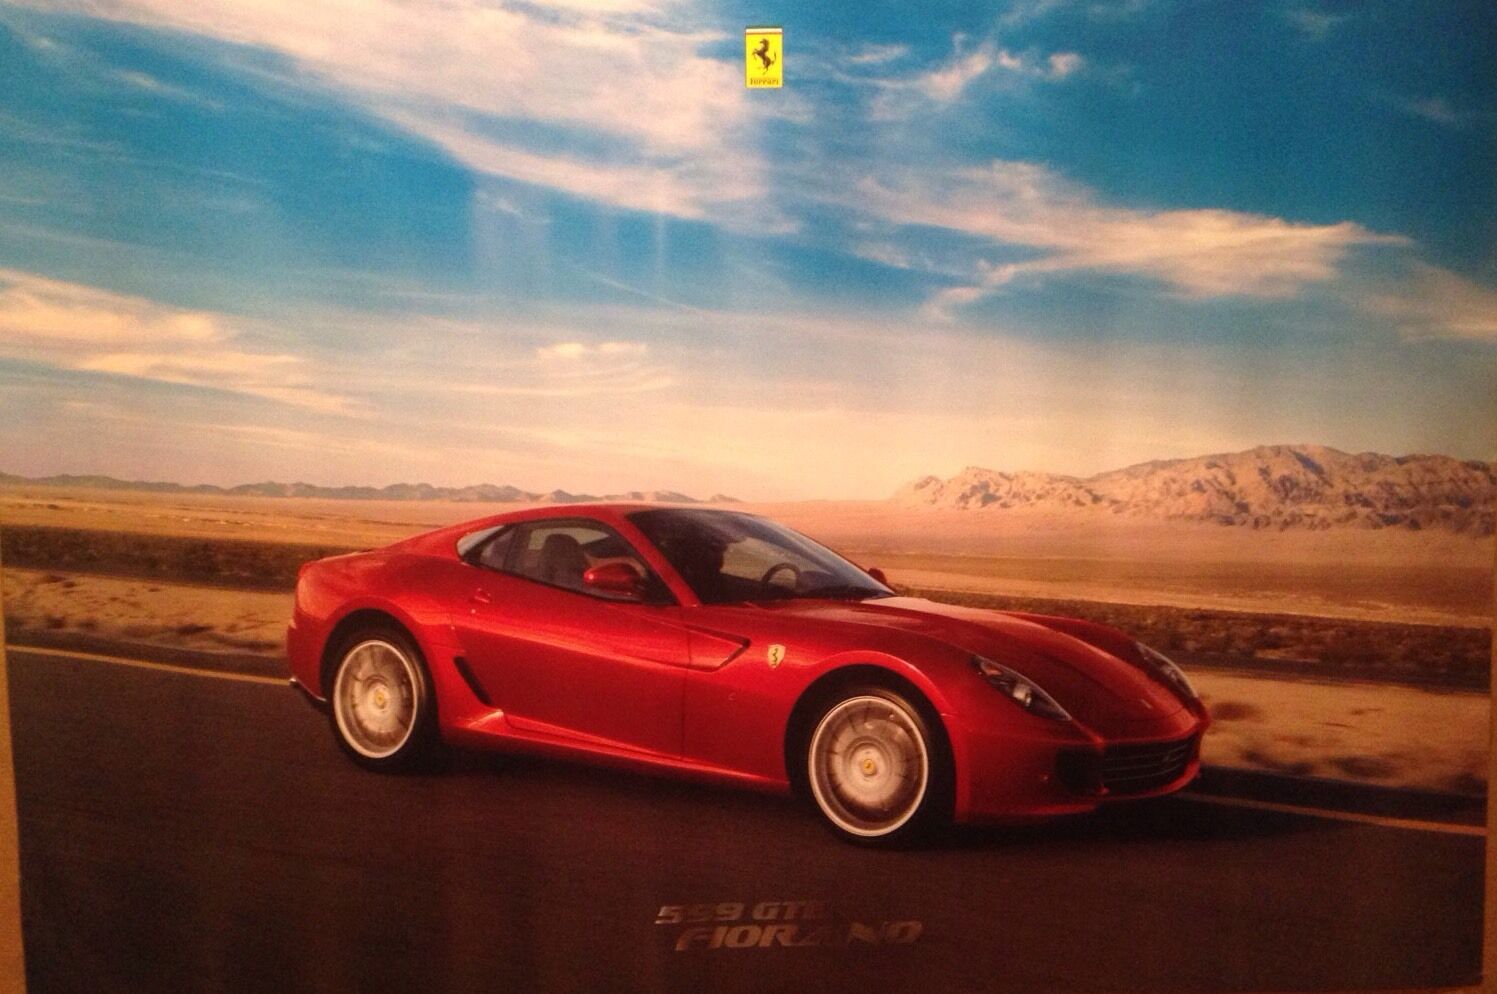 Ferrari 599 GTB Fiorano Factory Produced Out of Print Car Poster WOW